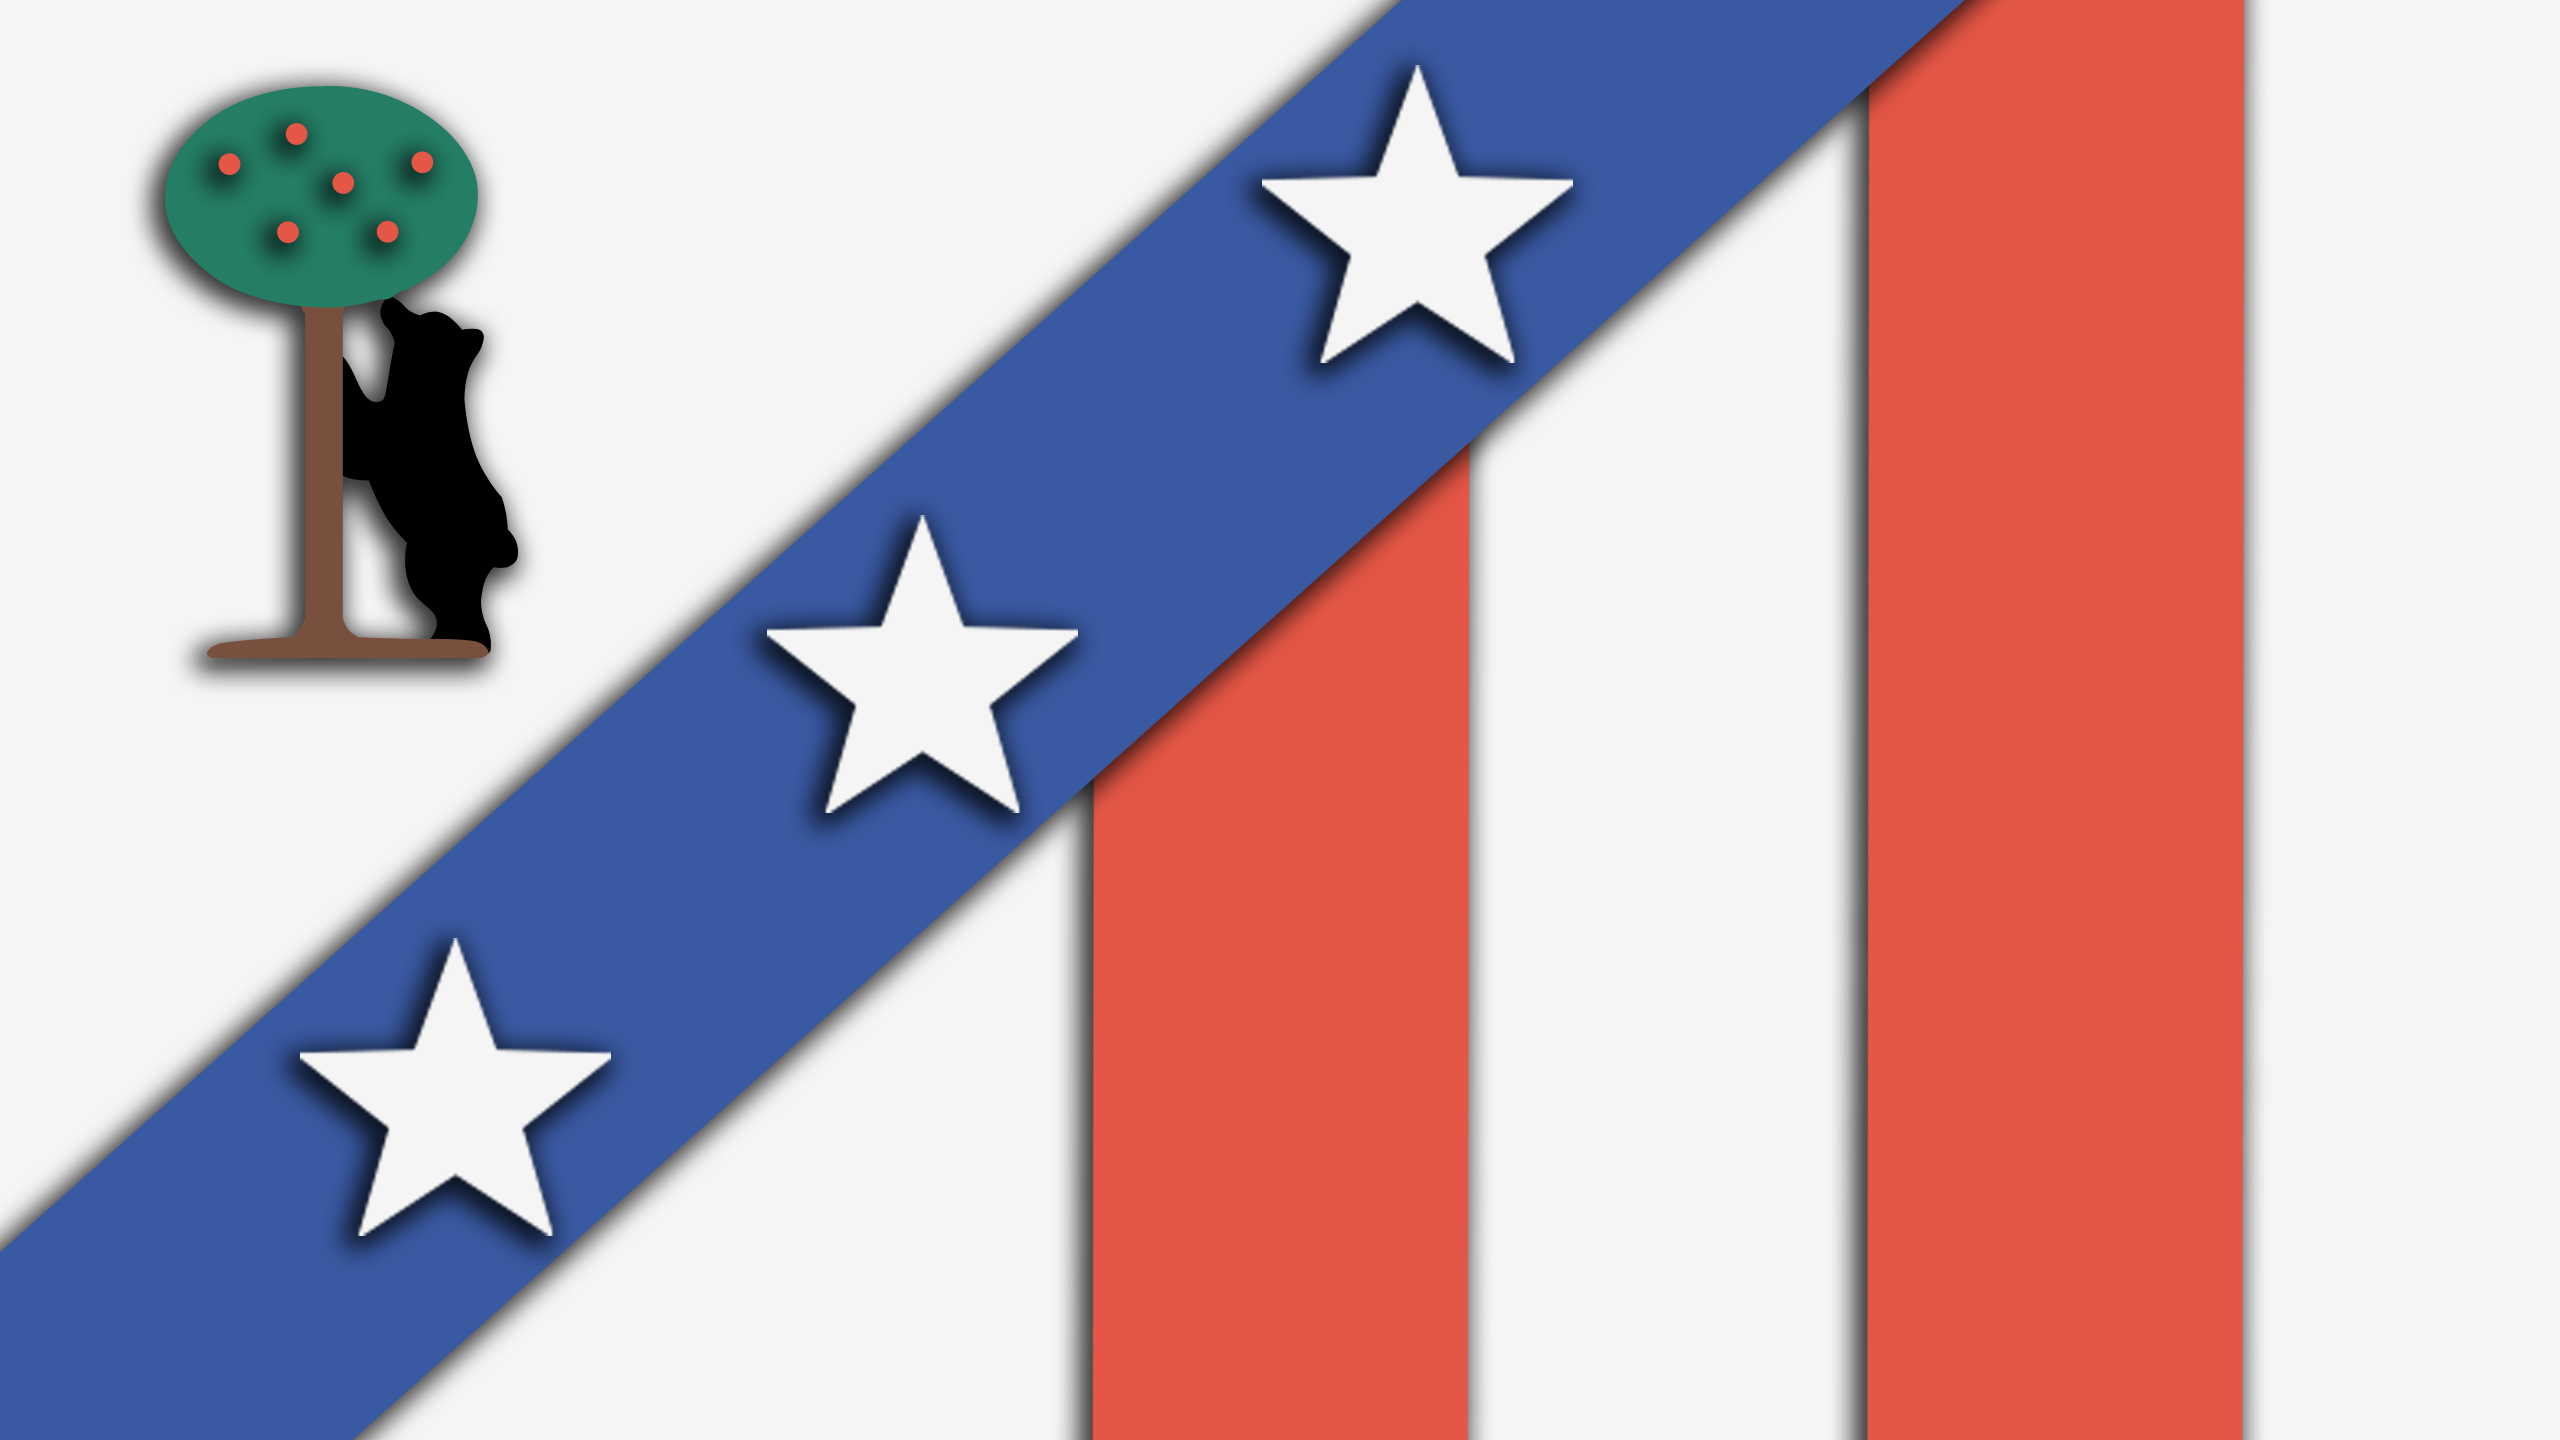 General 2560x1440 Atletico Madrid soccer soccer clubs sport material style sports club digital art stars red white blue bears